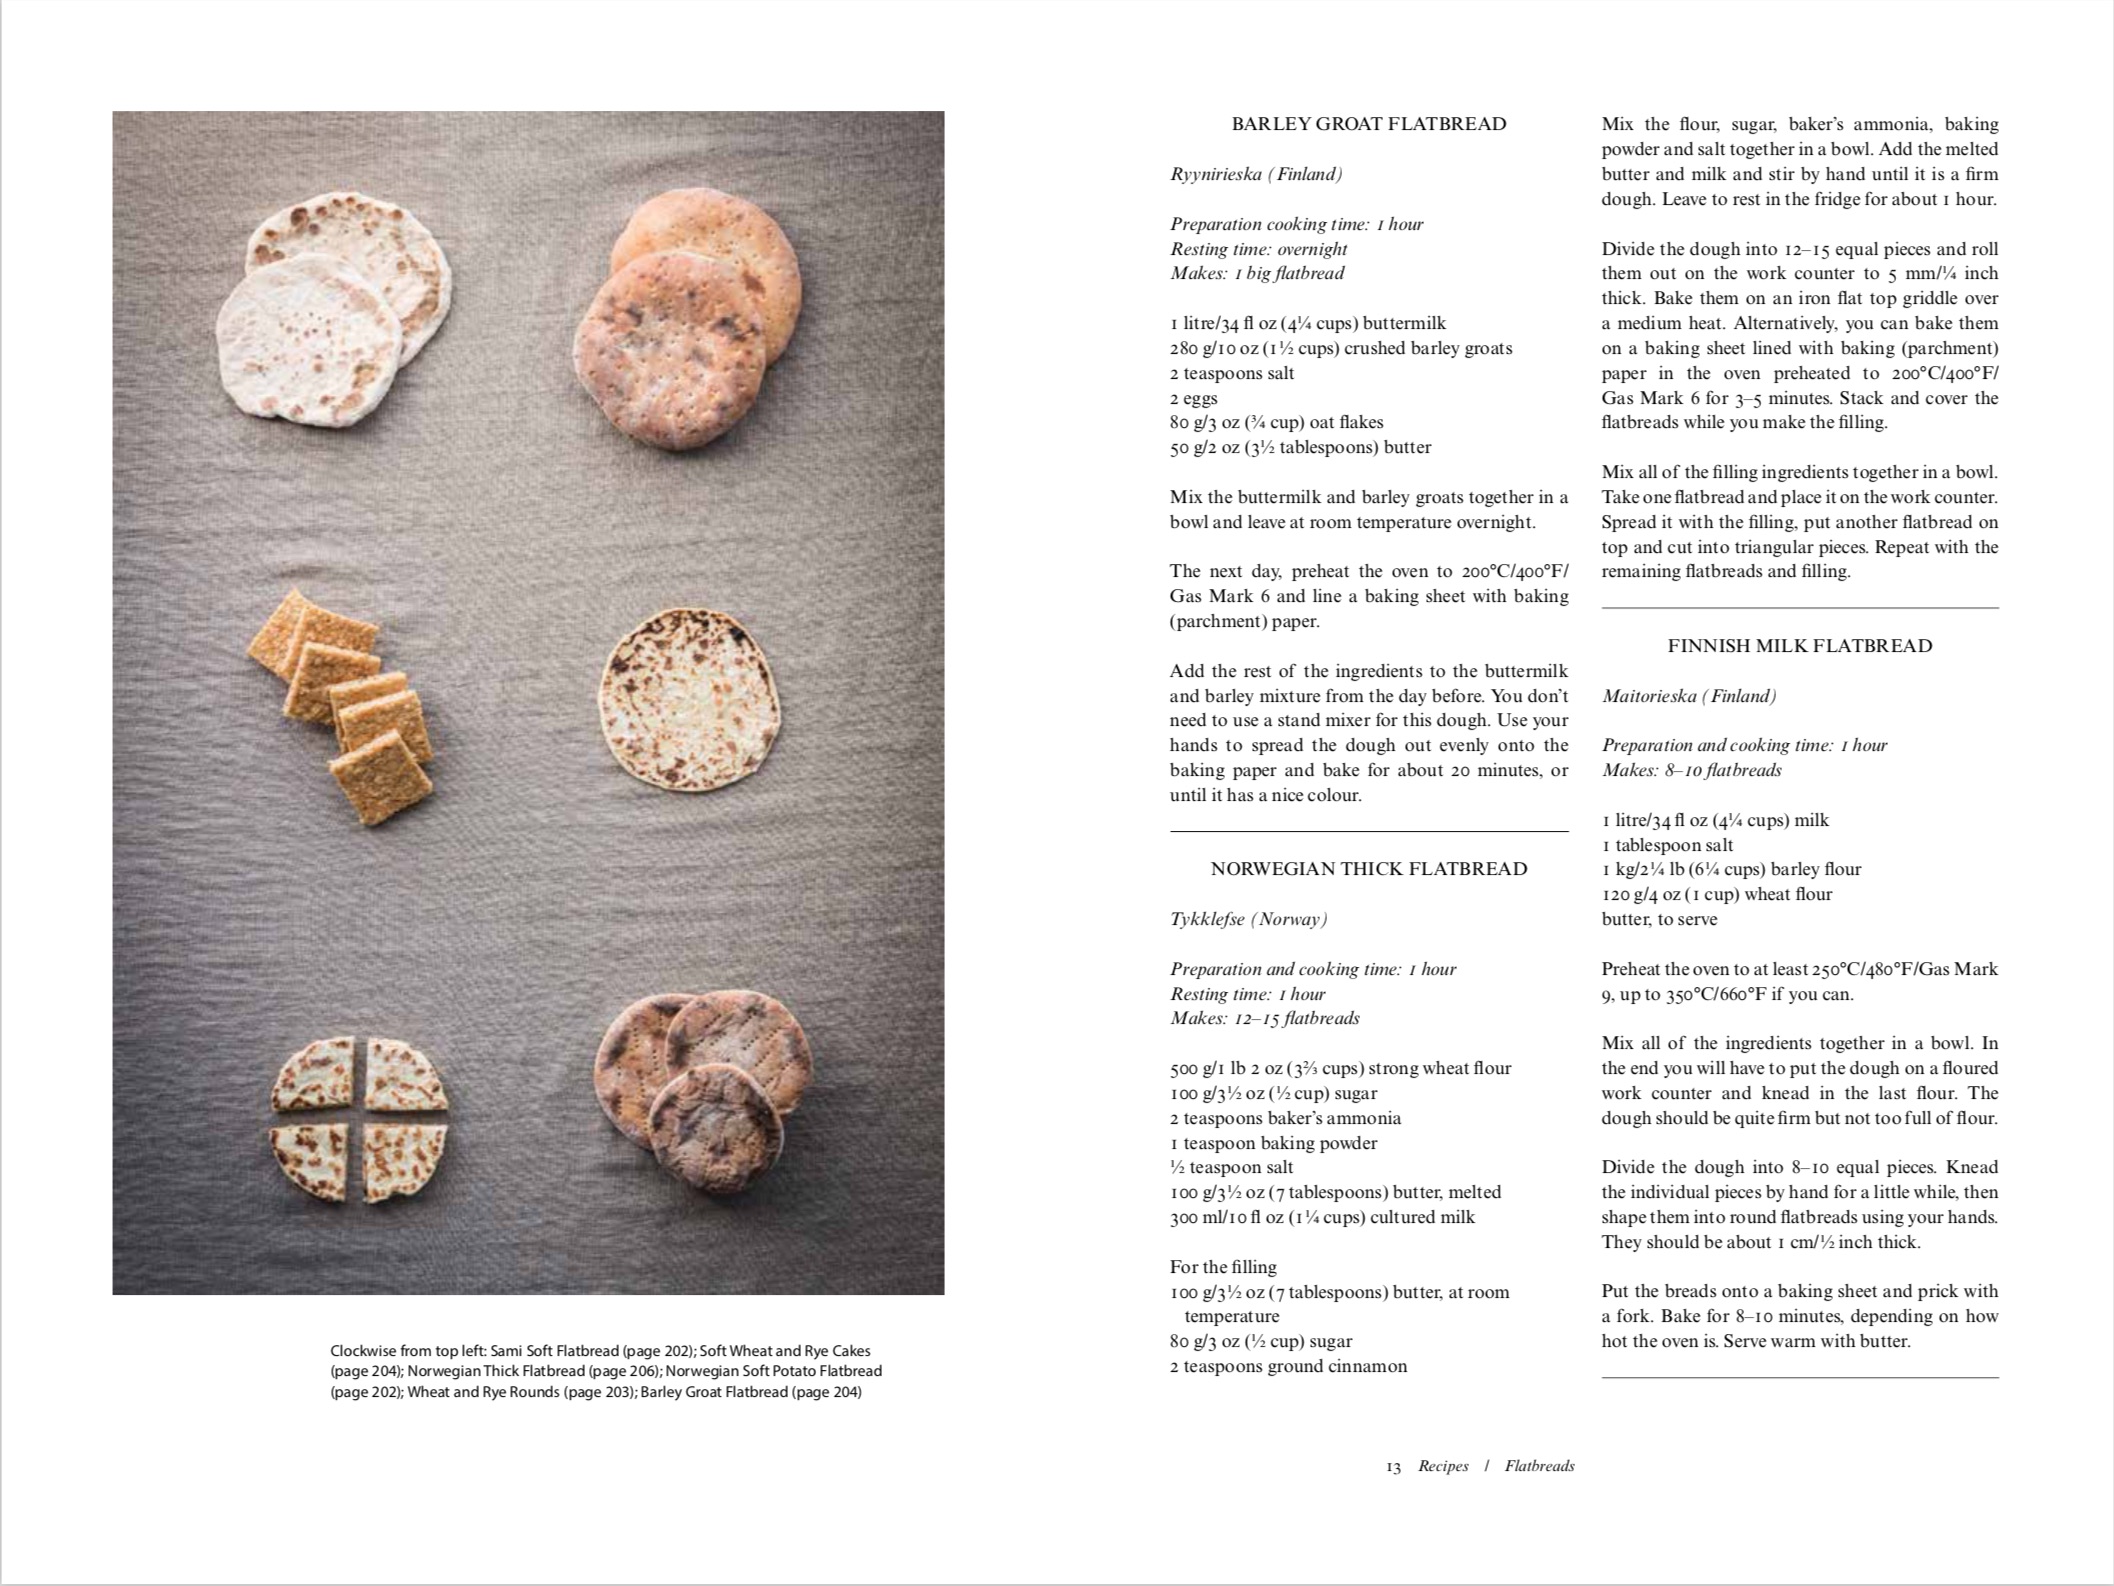 By Magnus Nilsson from The Nordic Baking Book copyright Phaidon 2018